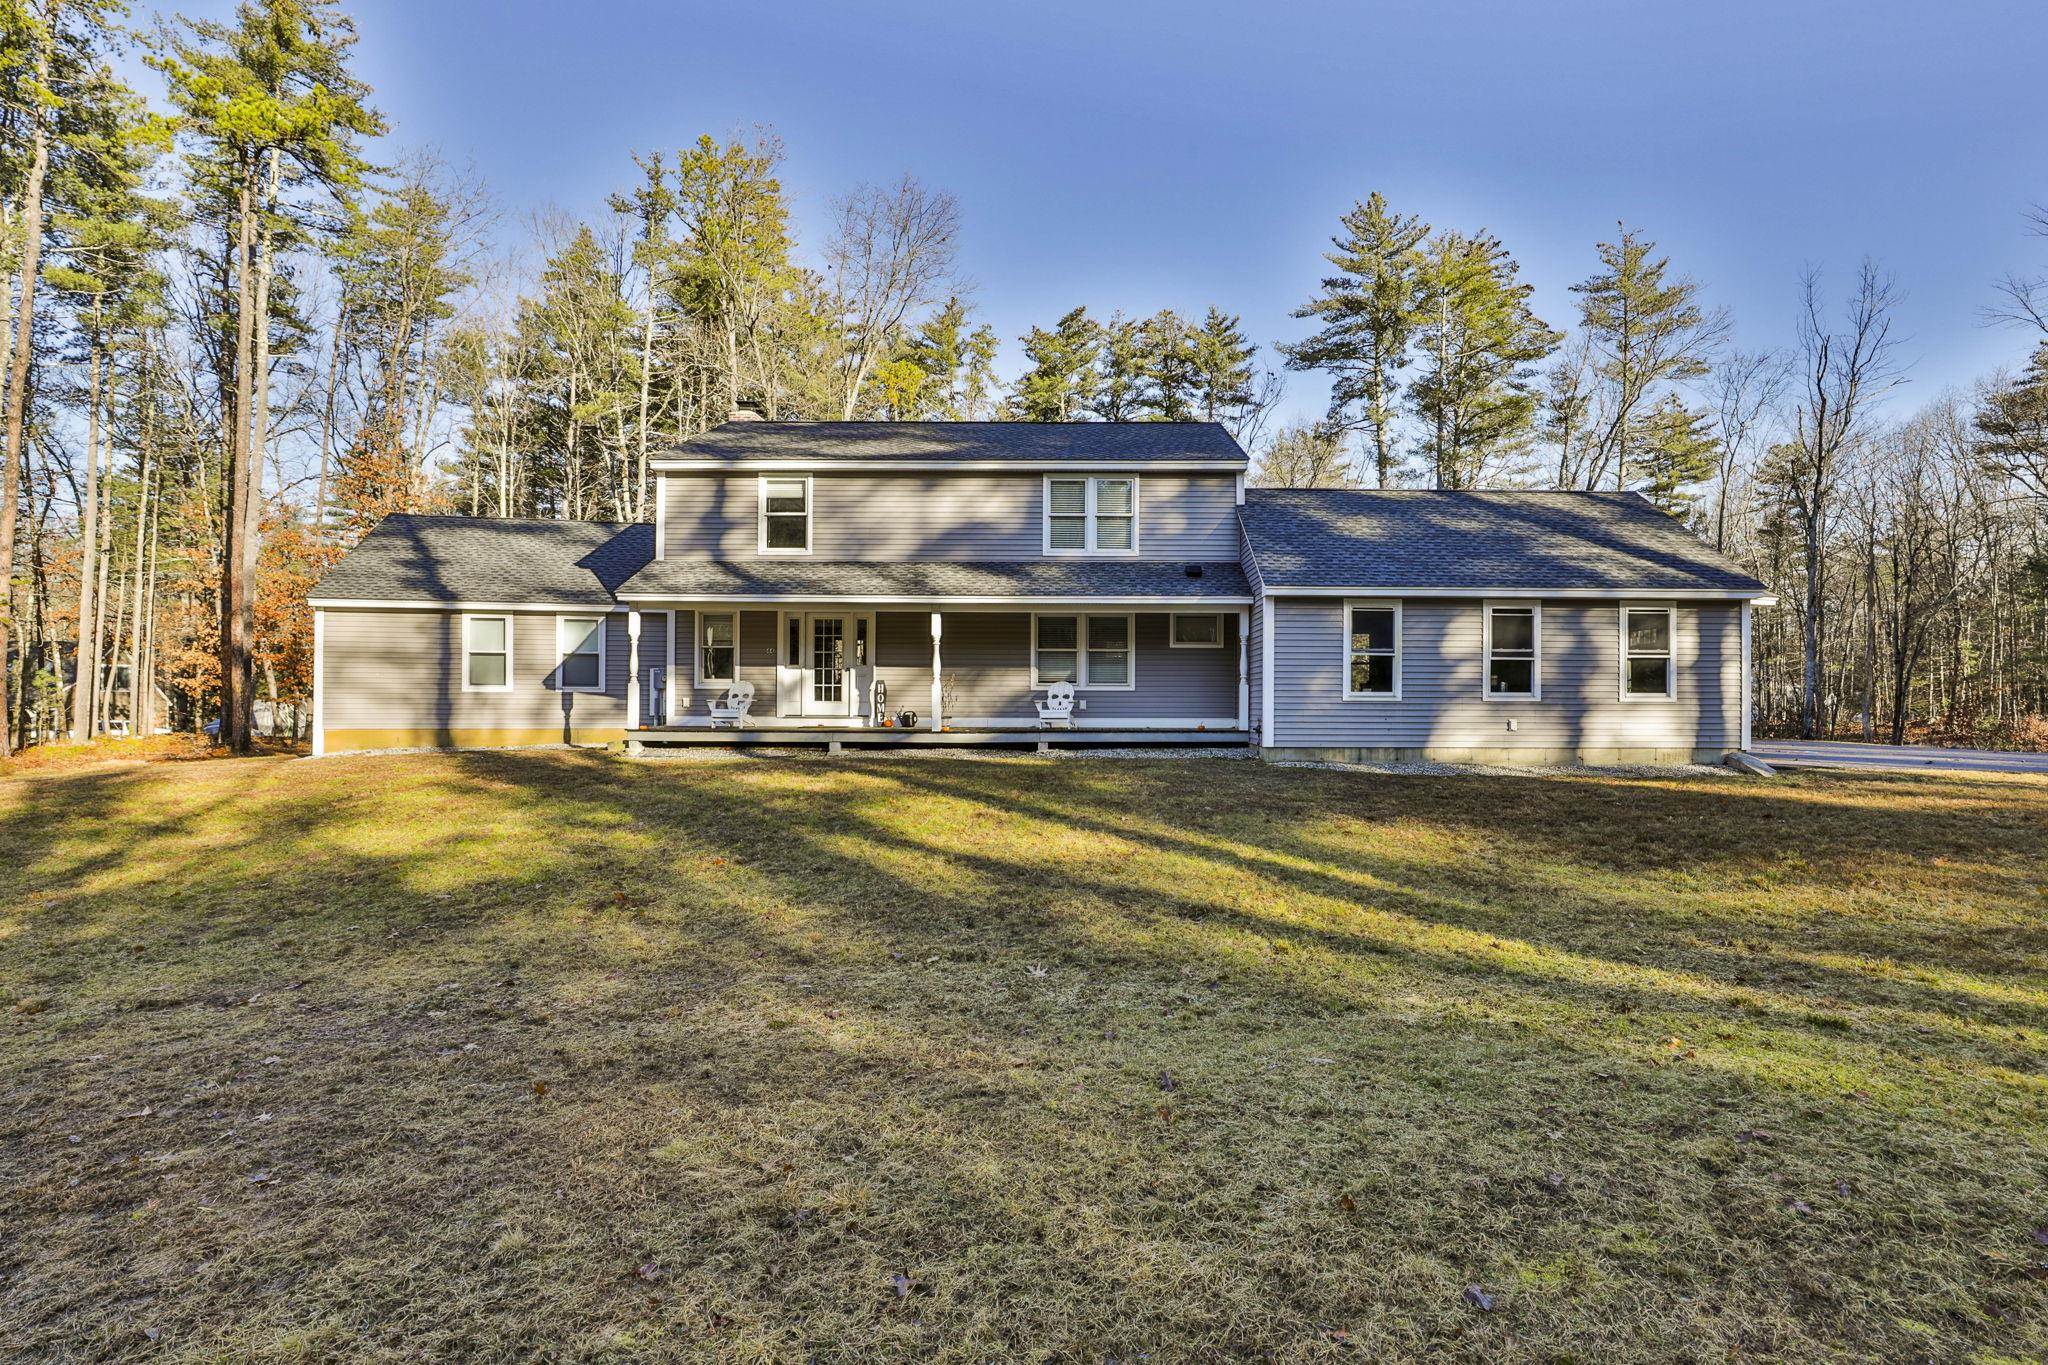 44 County Road, Amherst, NH 03031